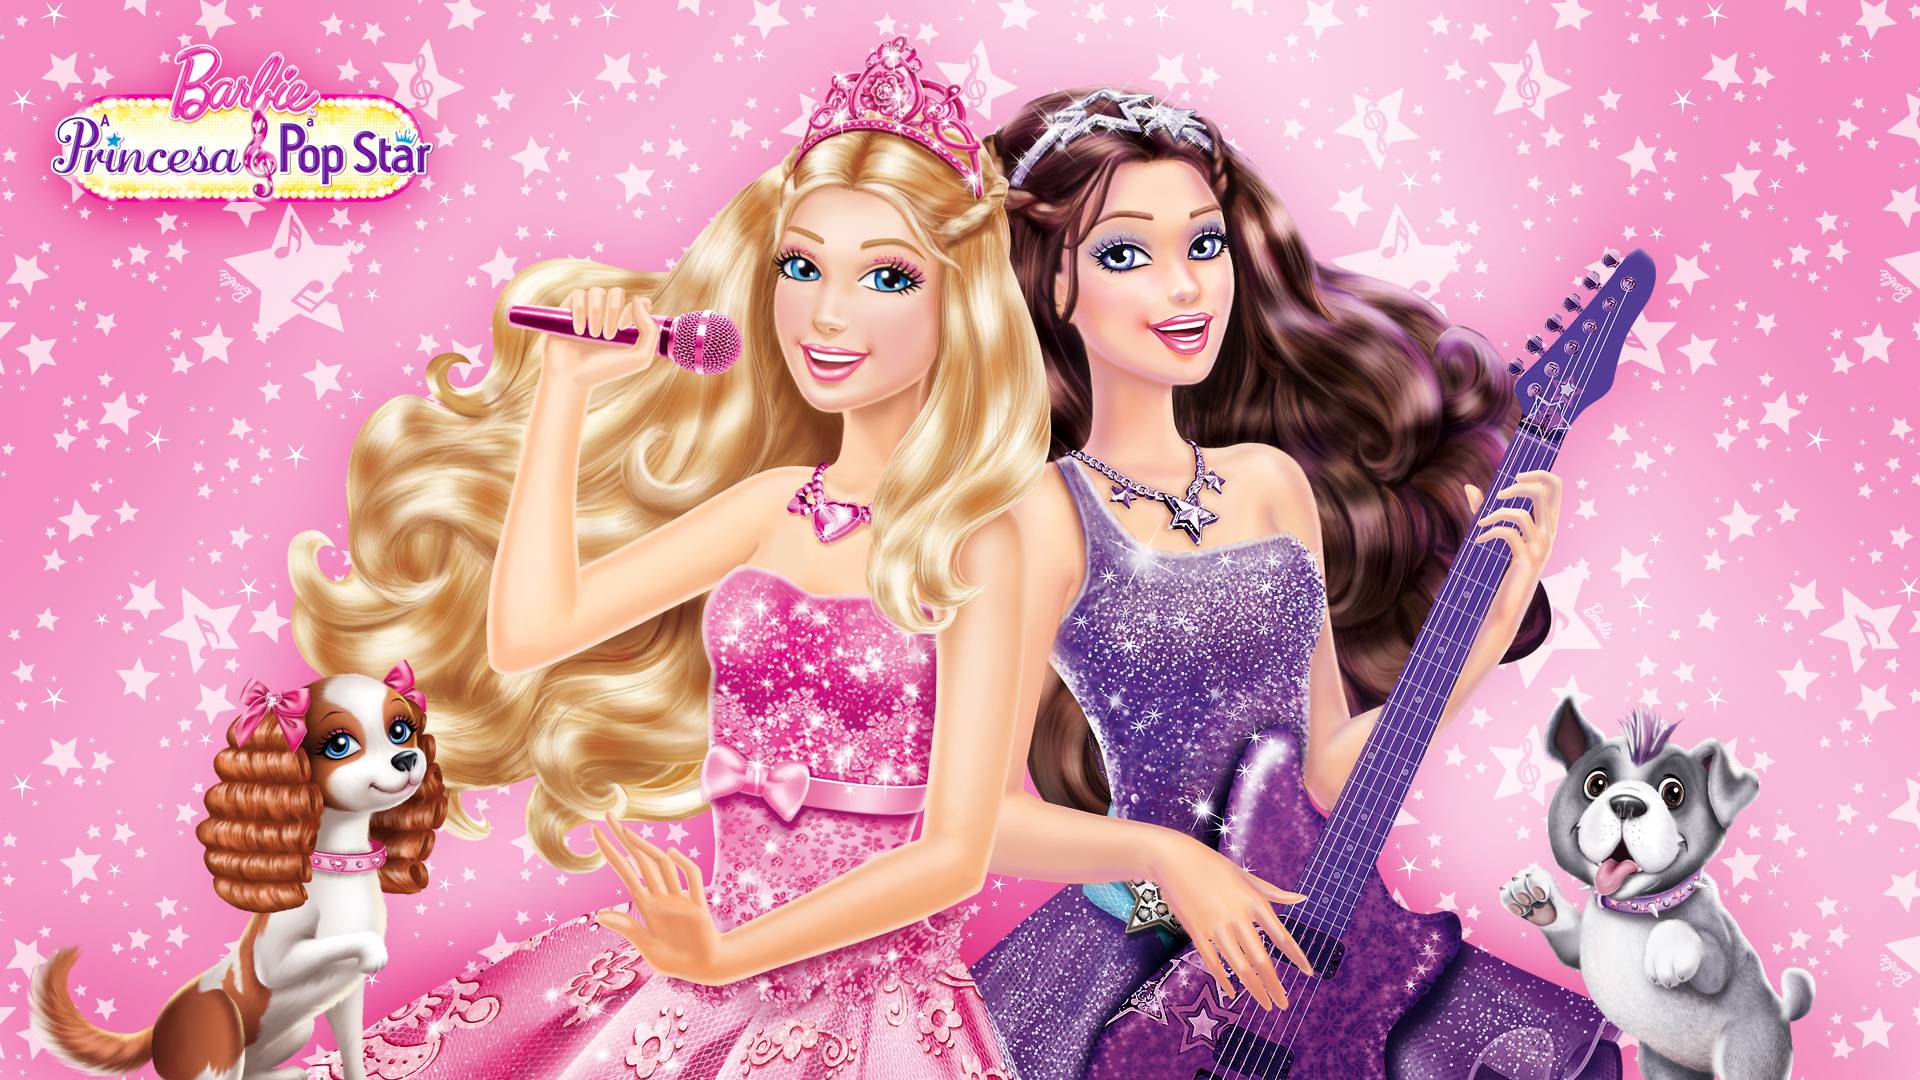 Barbies pictures wallpapers hd. Barbie clipart group